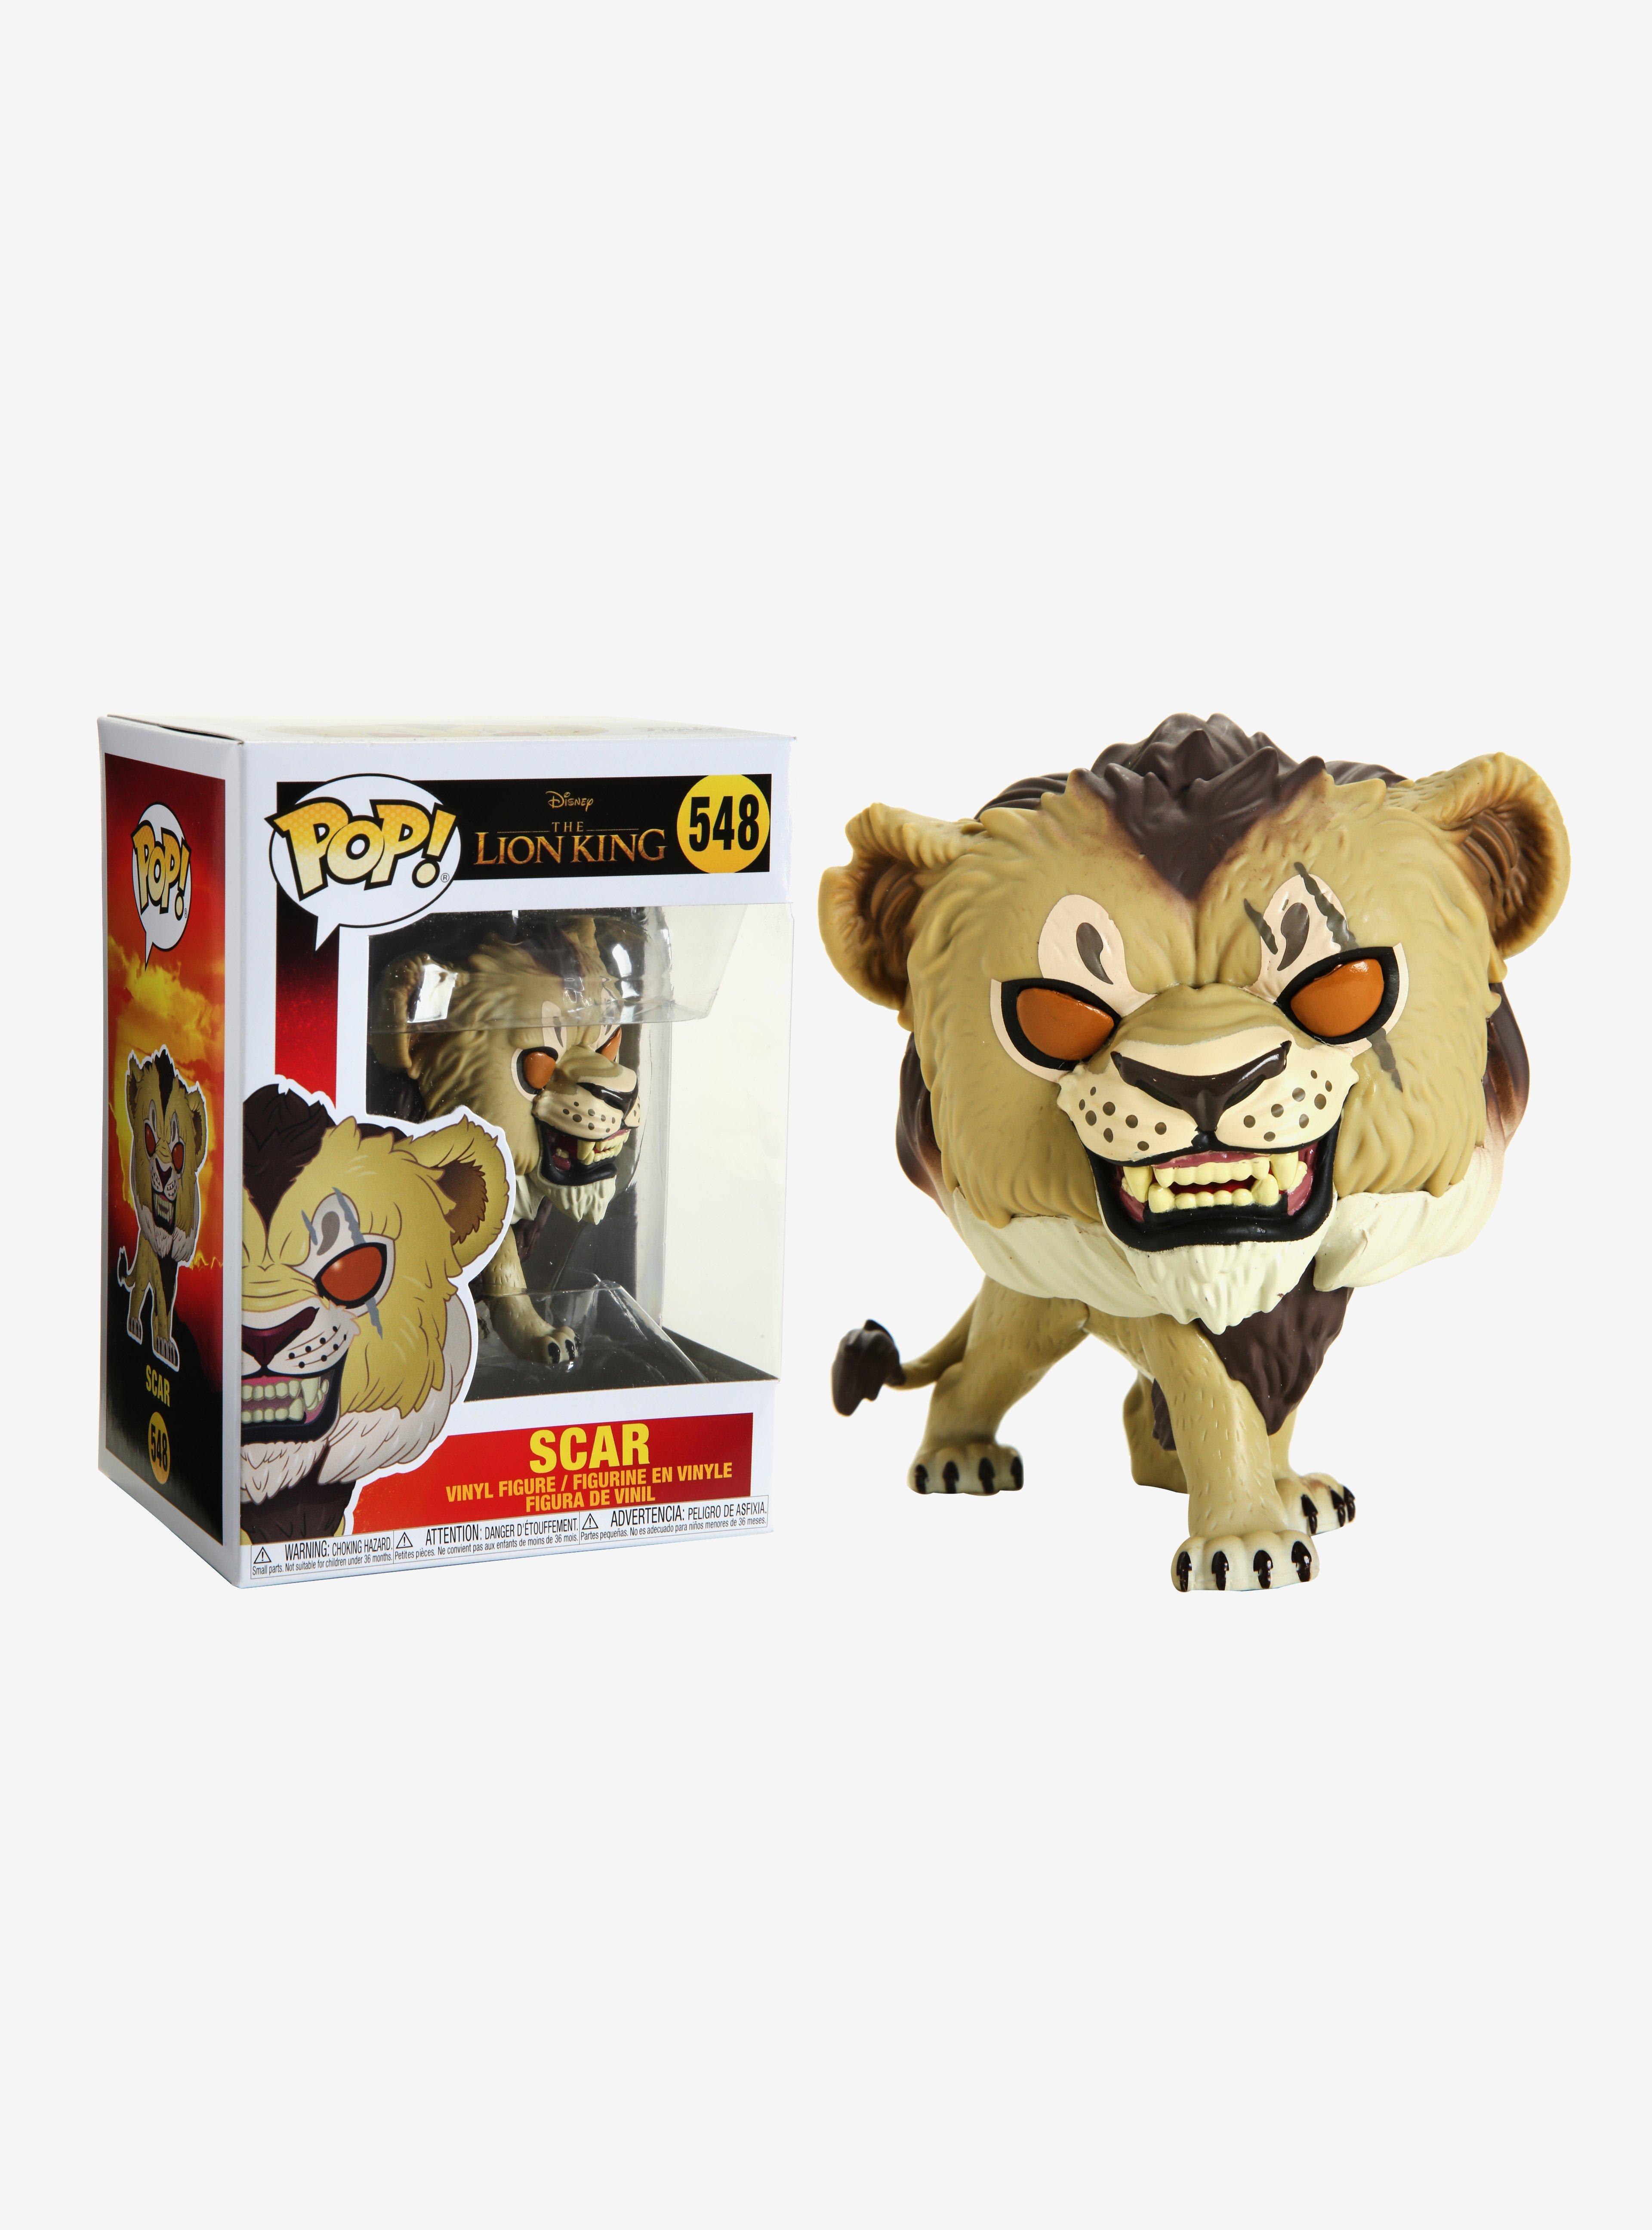 Pop The lion king SCAR with box Vinyl Action Model Toys for Children gift 